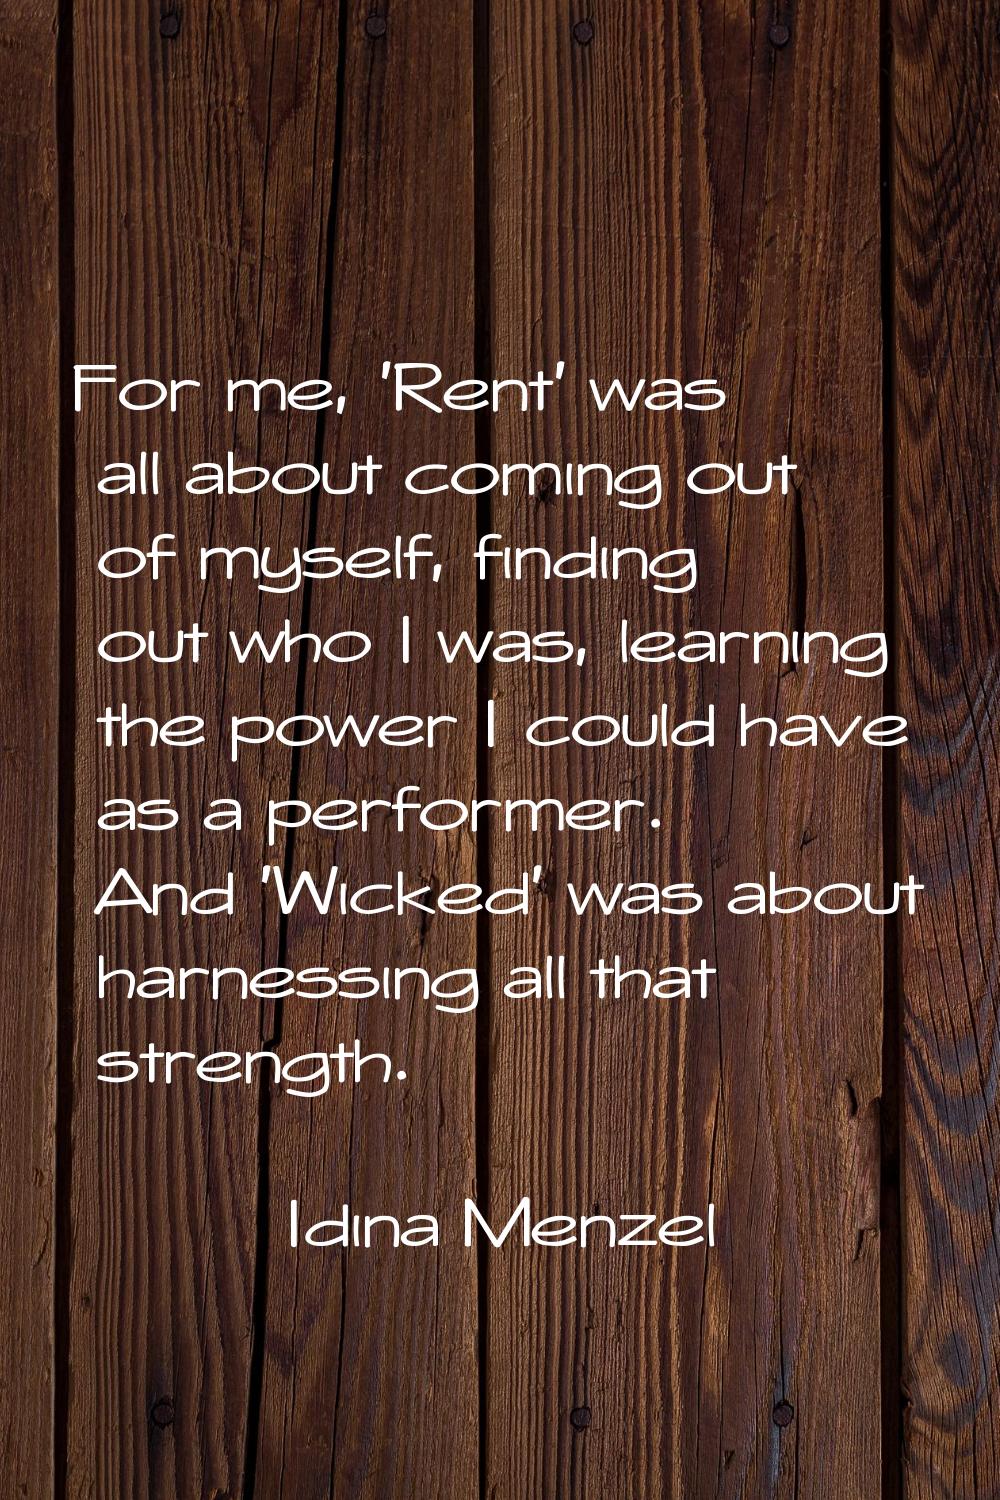 For me, 'Rent' was all about coming out of myself, finding out who I was, learning the power I coul